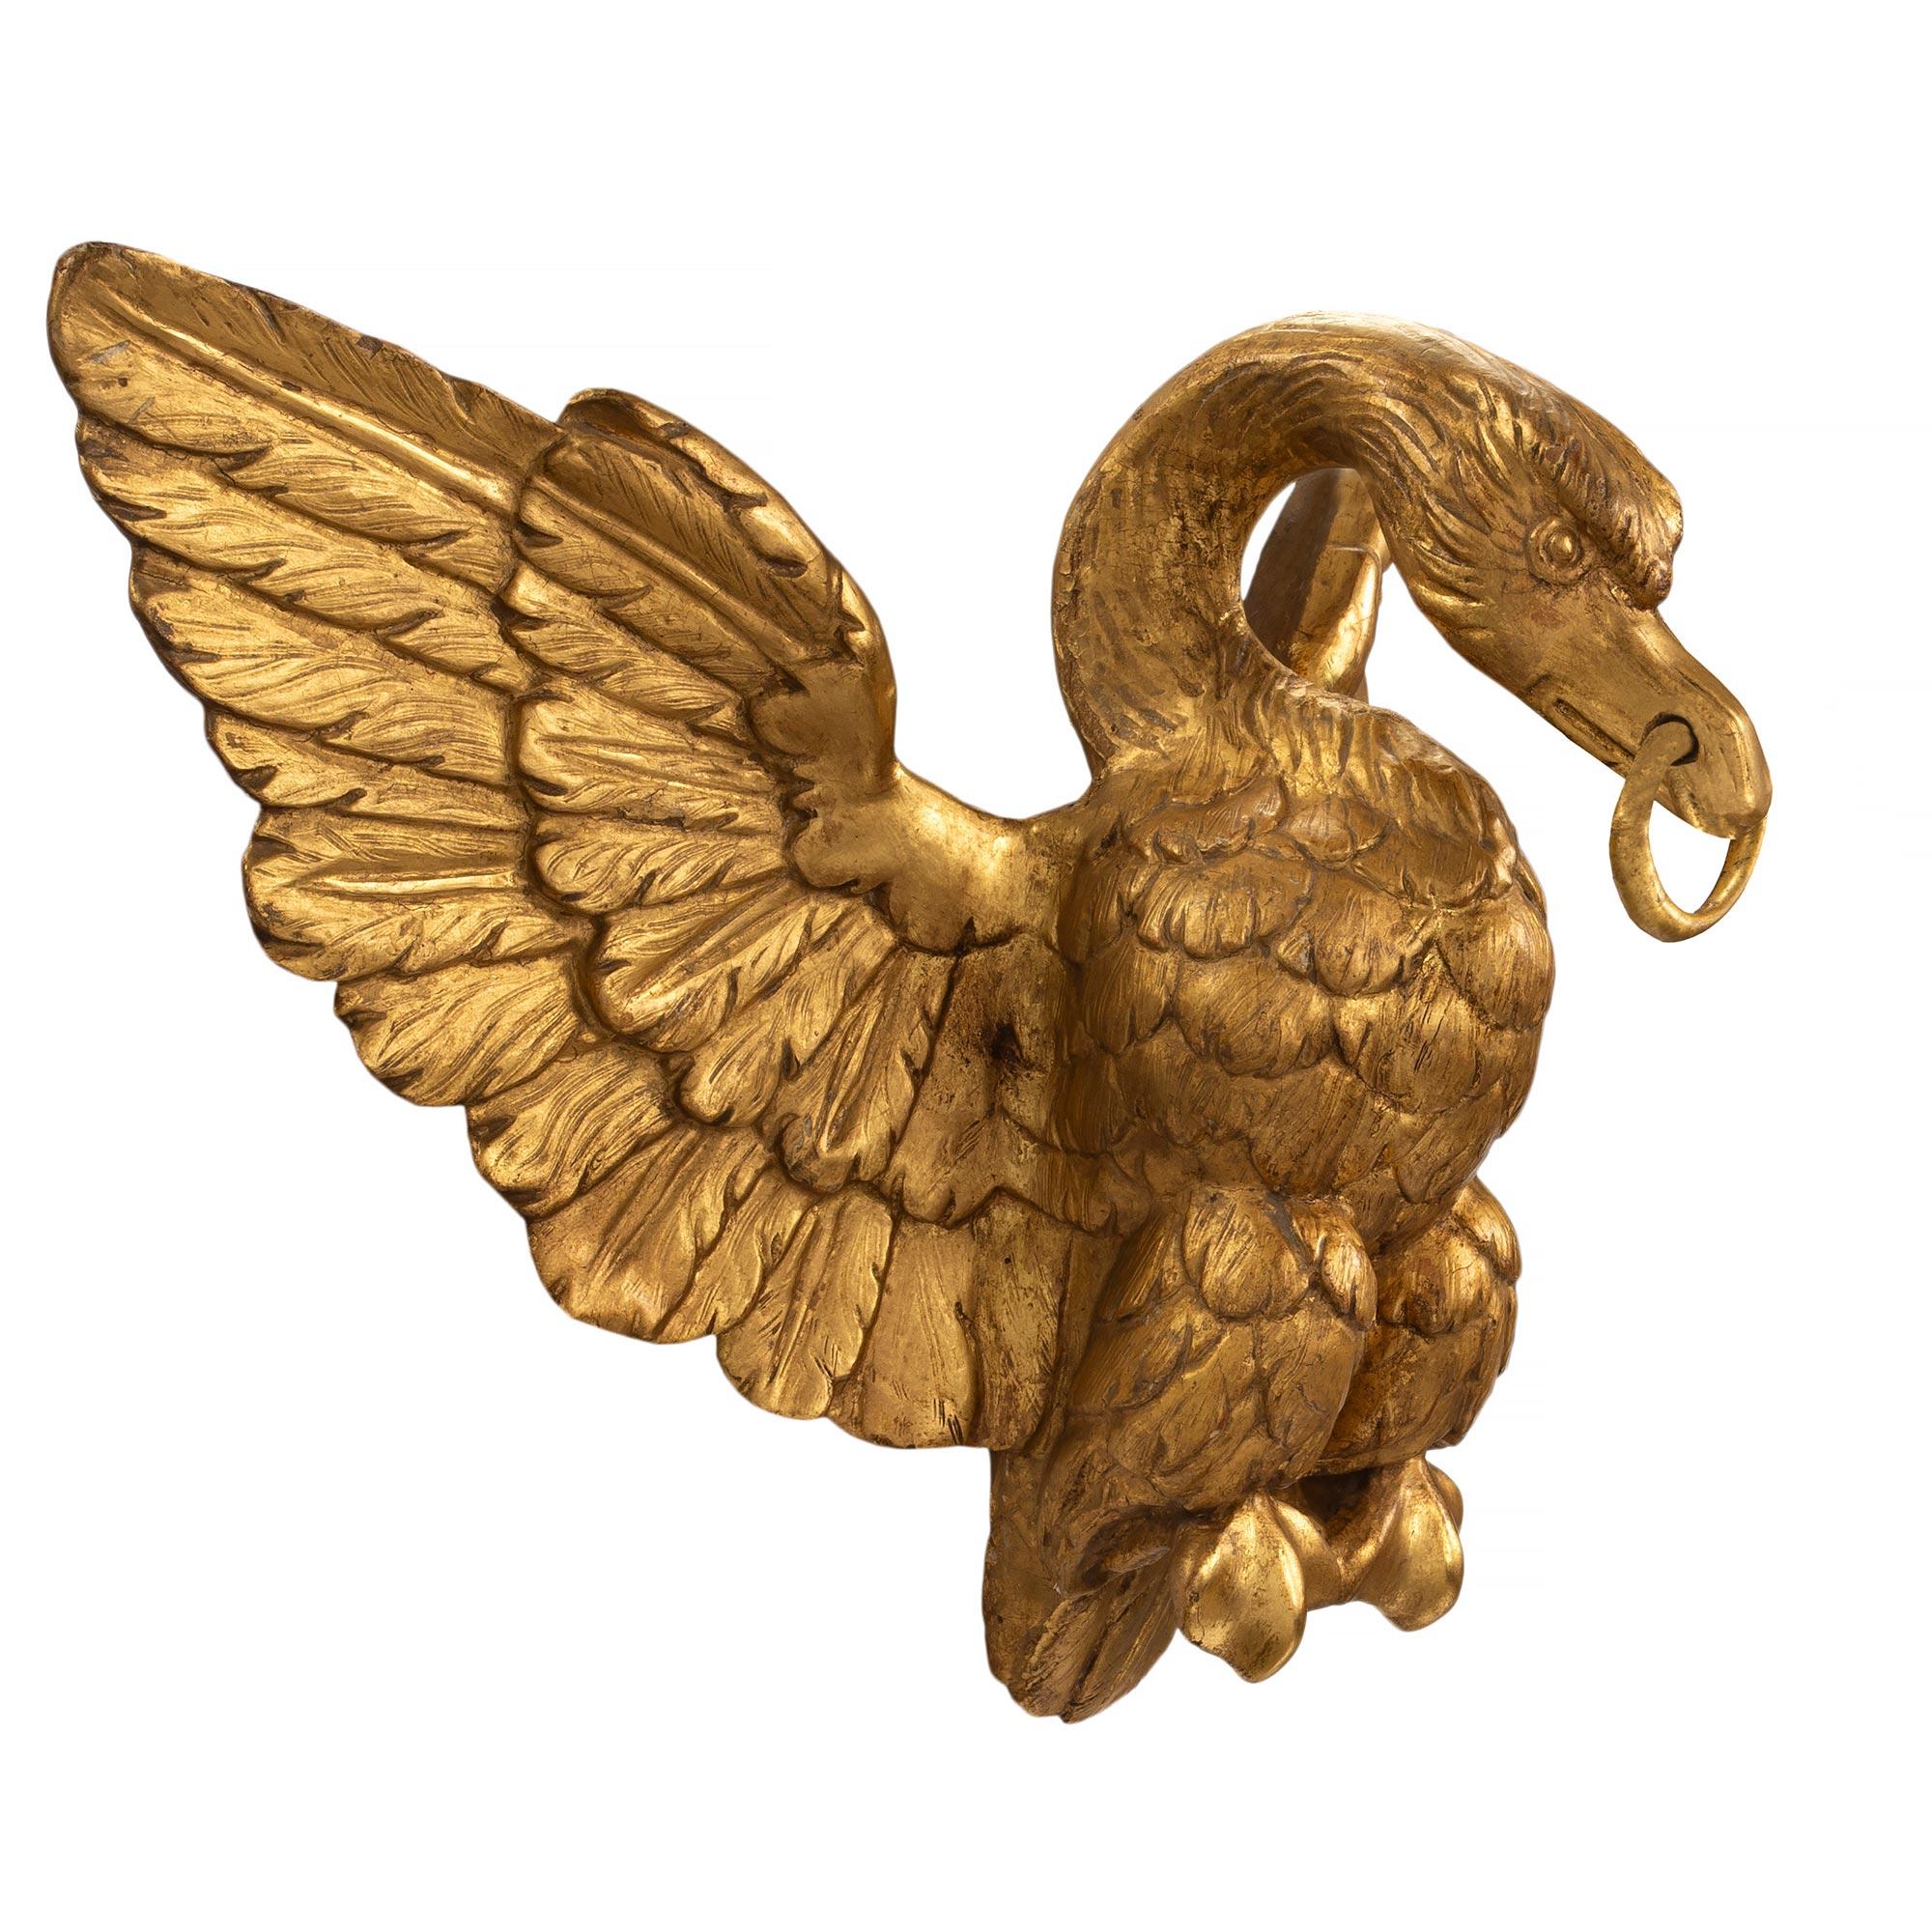 Italian Mid-18th Century Louis XVI Period Wall Mounted Open Winged Giltwood Swan In Good Condition For Sale In West Palm Beach, FL